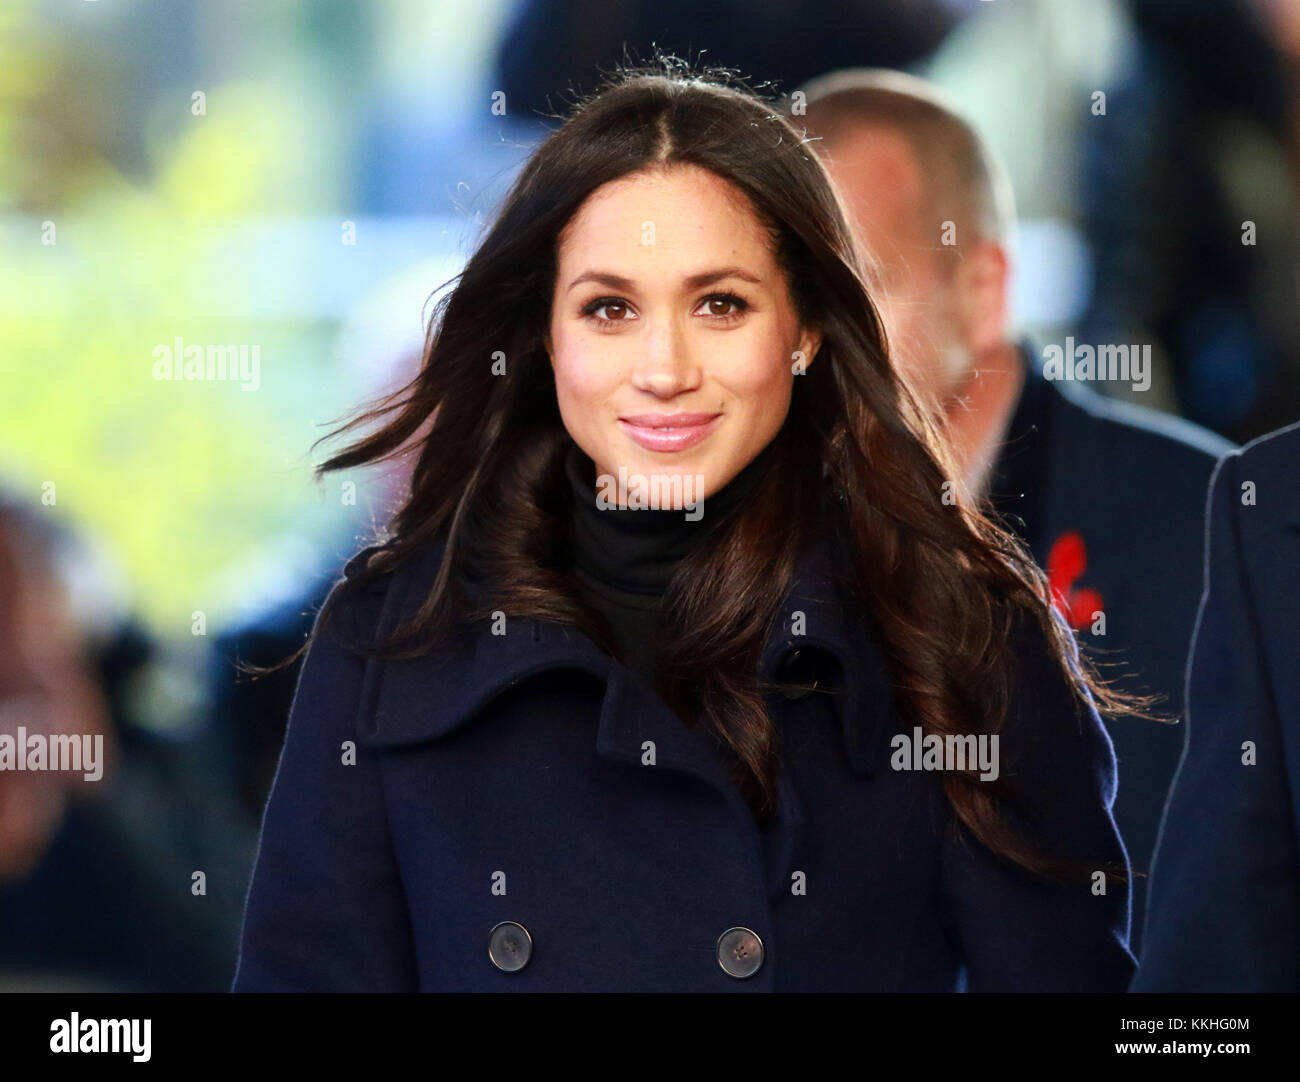 Nottingham, UK. 01st Dec, 2017. Meghan Markle HRH Prince Harry (of Wales) and Meghan Markle on their first official engagement together, since announcing their engagement earlier in the week. They started their visit at National Justice Museum, before walking to the Nottingham Contemporary, which is hosting a Terrence Higgins Trust World Aids Day charity fair, in Nottingham, Nottinghamshire, on December 1, 2017. Credit: Paul Marriott/Alamy Live News Stock Photo